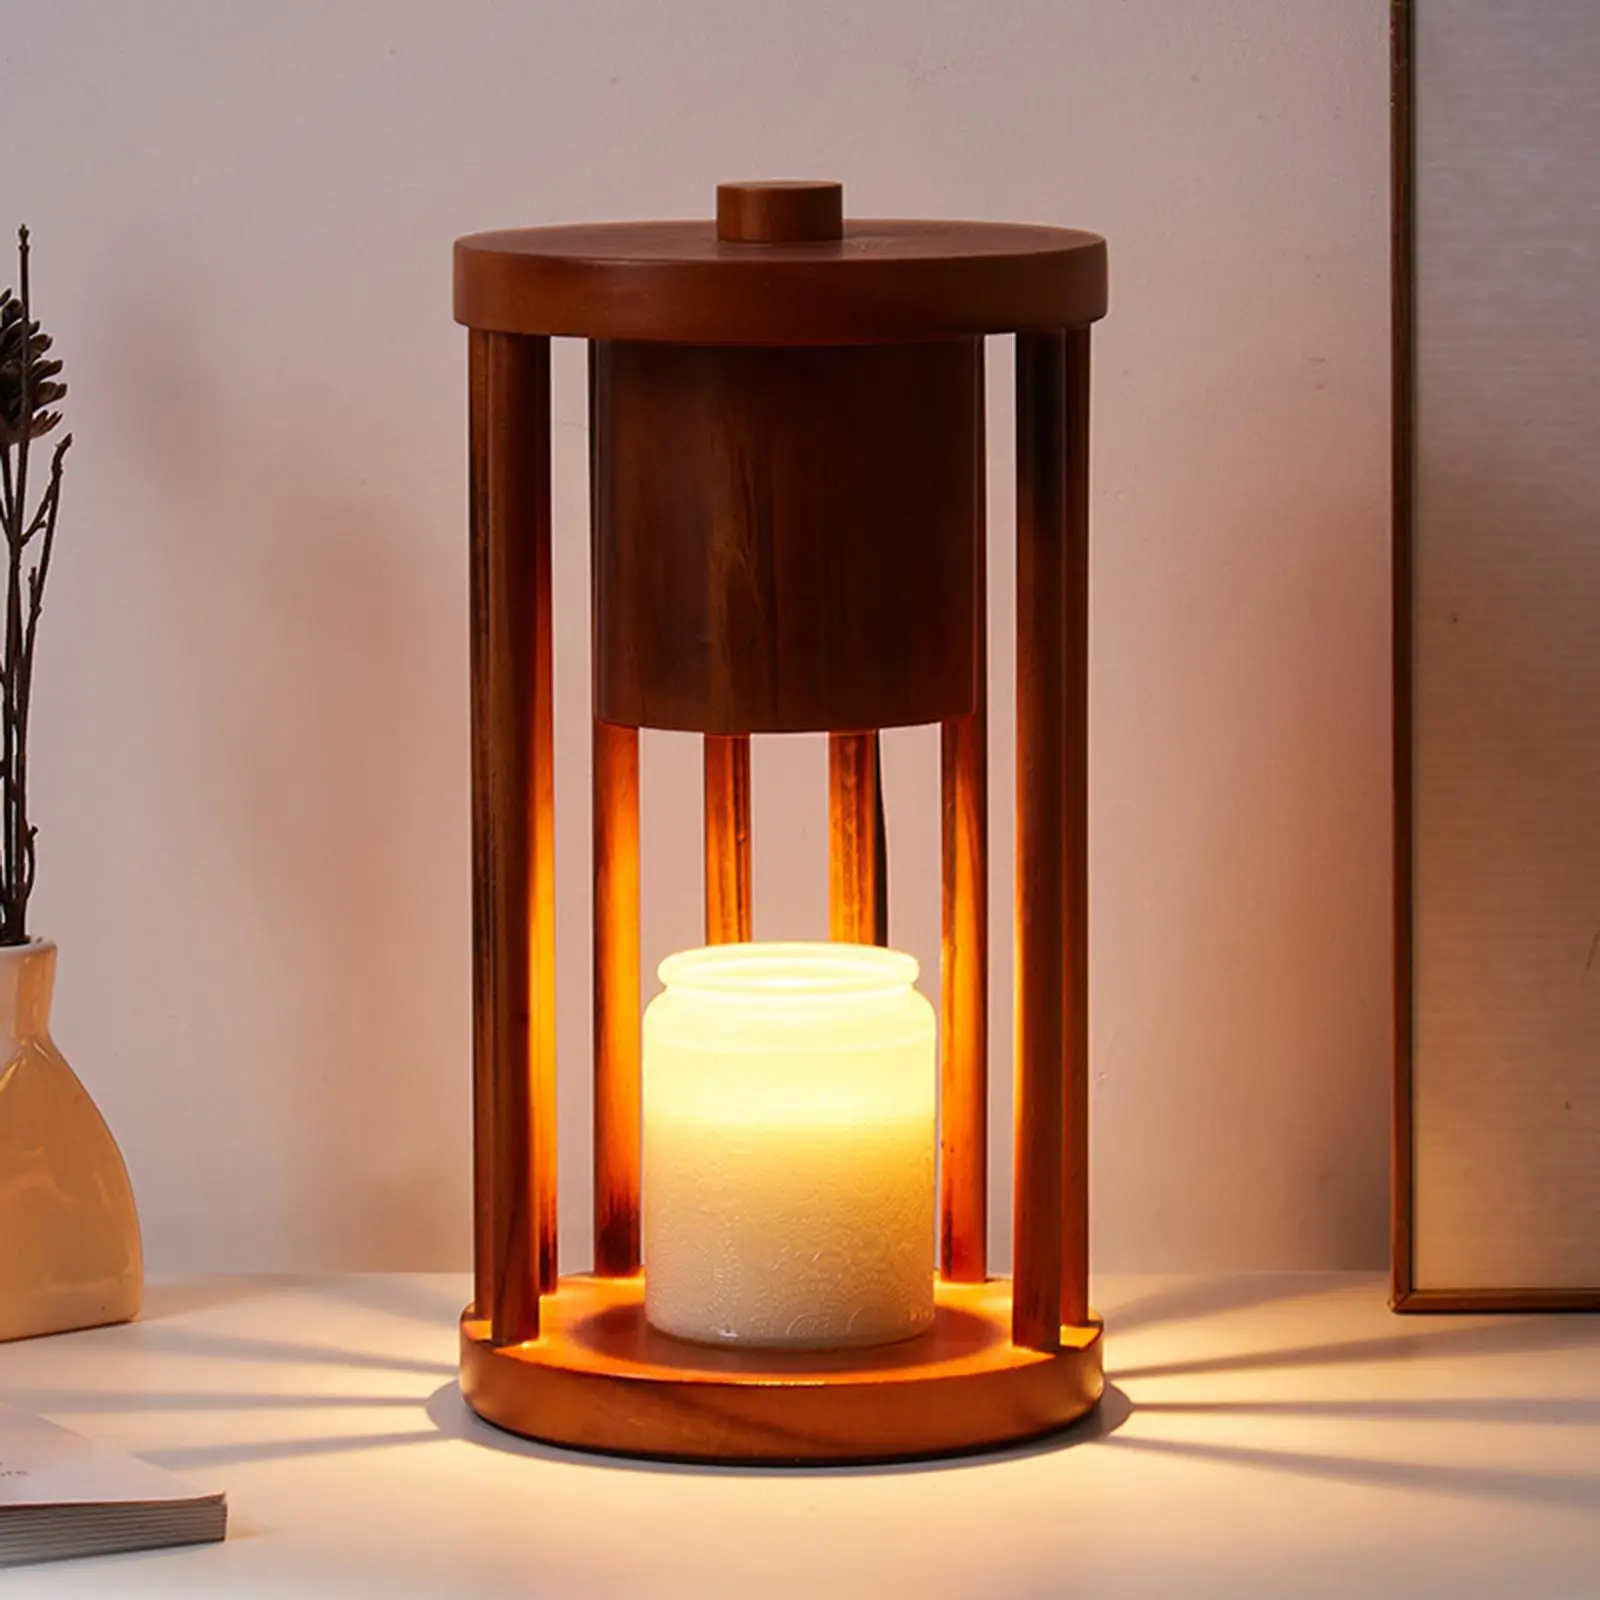  Melting Heater Candle Warmer  Candle Warmer Lamp for Tabletop